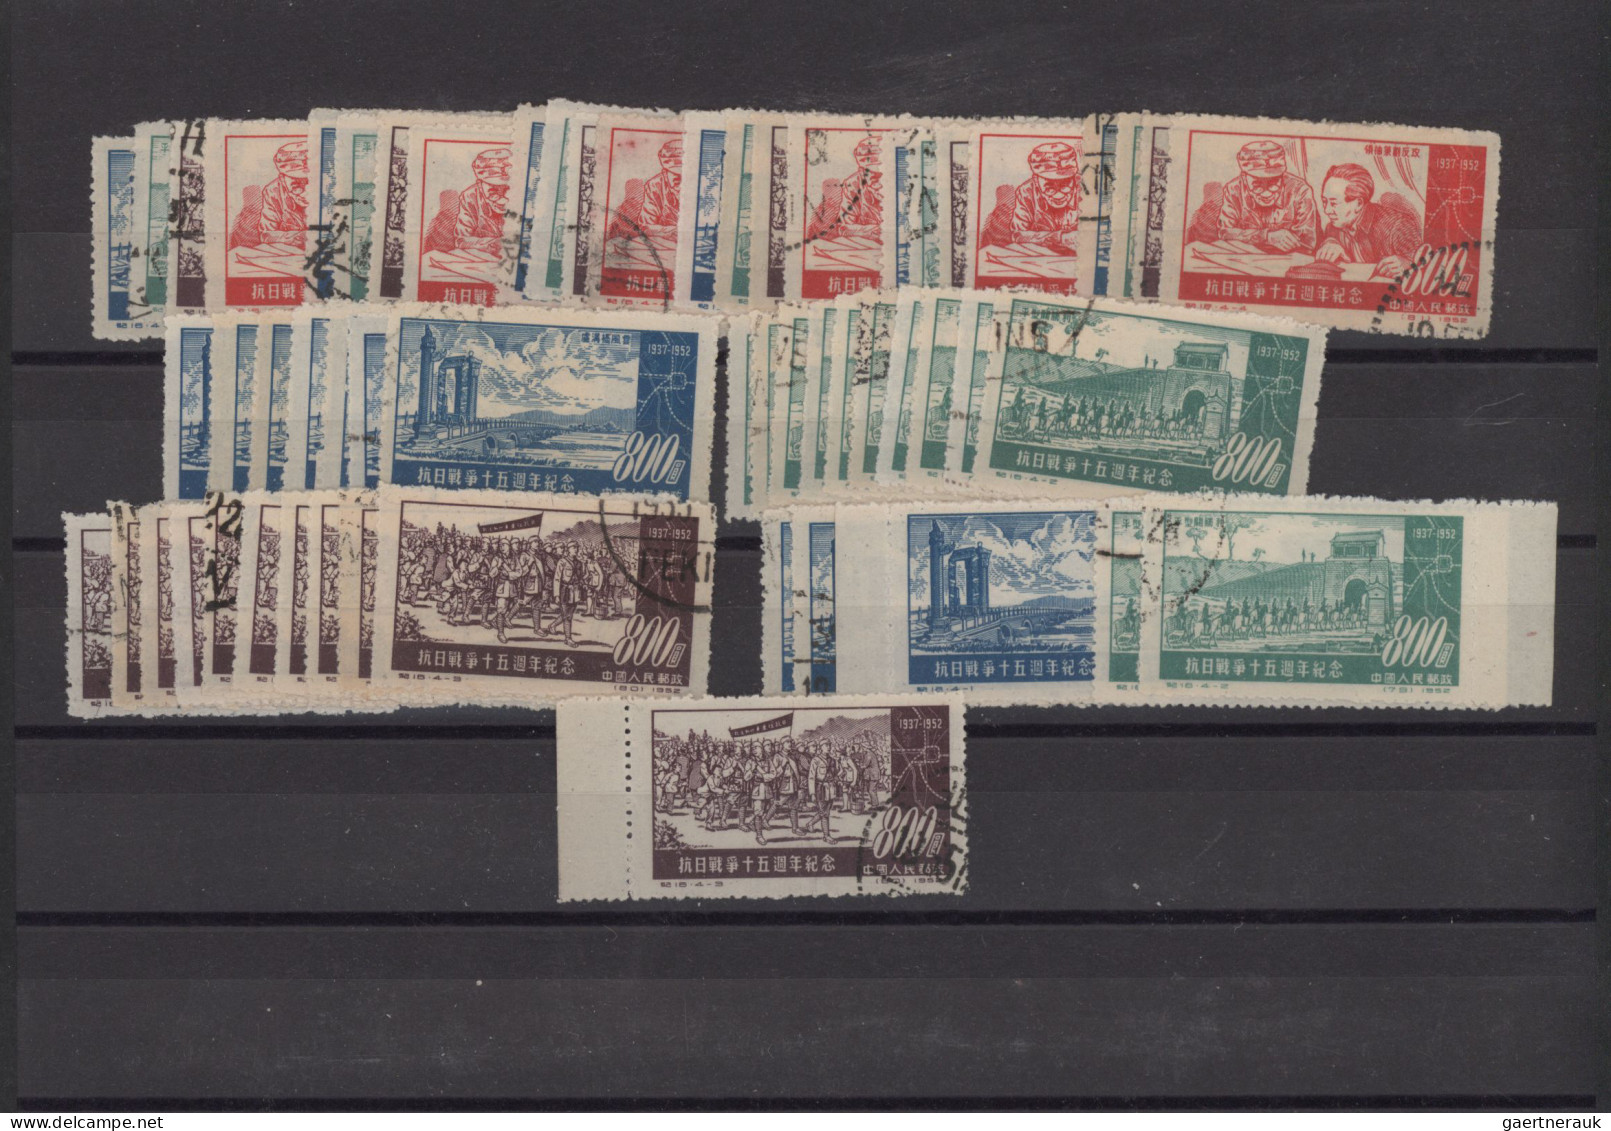 China (PRC): 1949/2020 (approx.), large collection of stamps, presentation packs